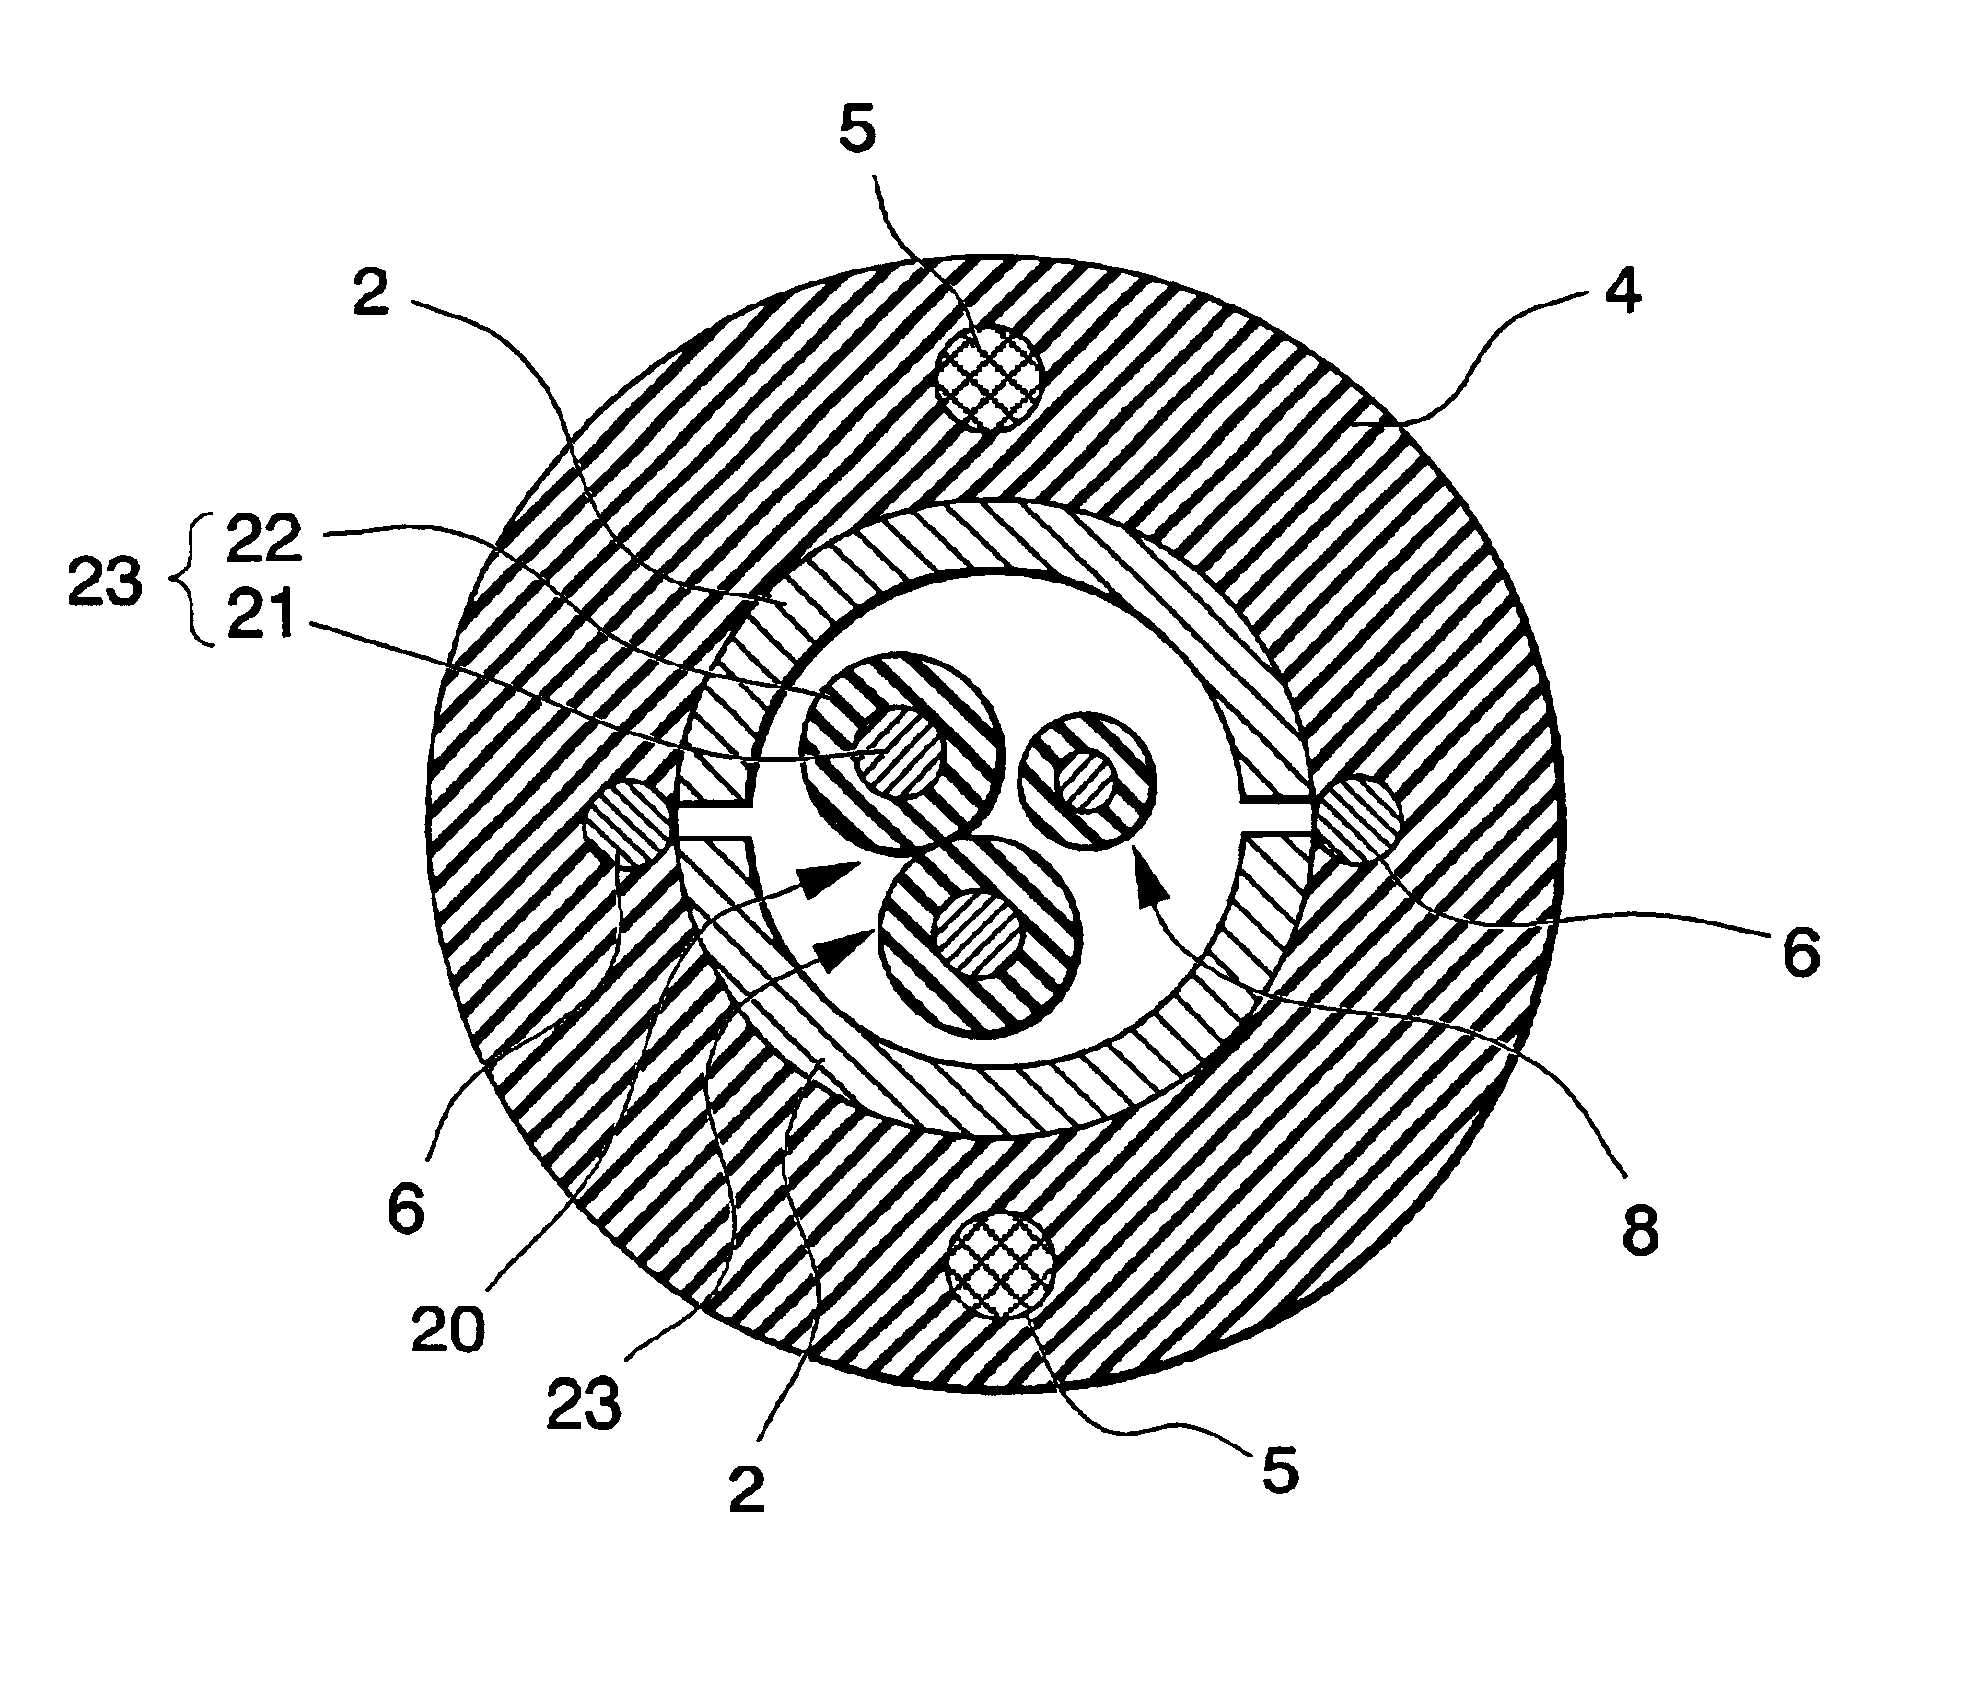 Optical cable having forming tape and rip cords